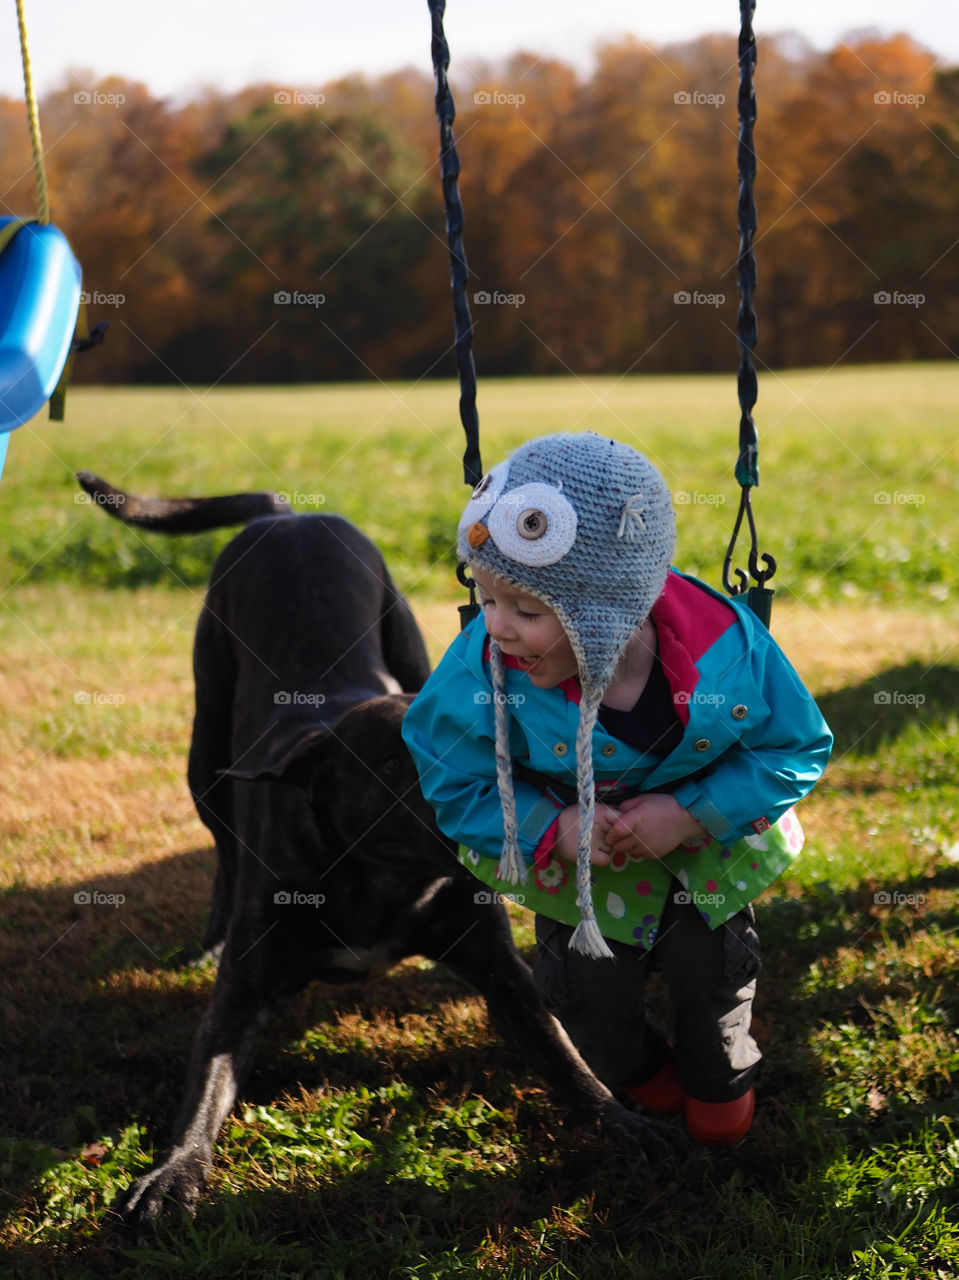 Big dog pushes little girl on the swing out in the field during the fall.